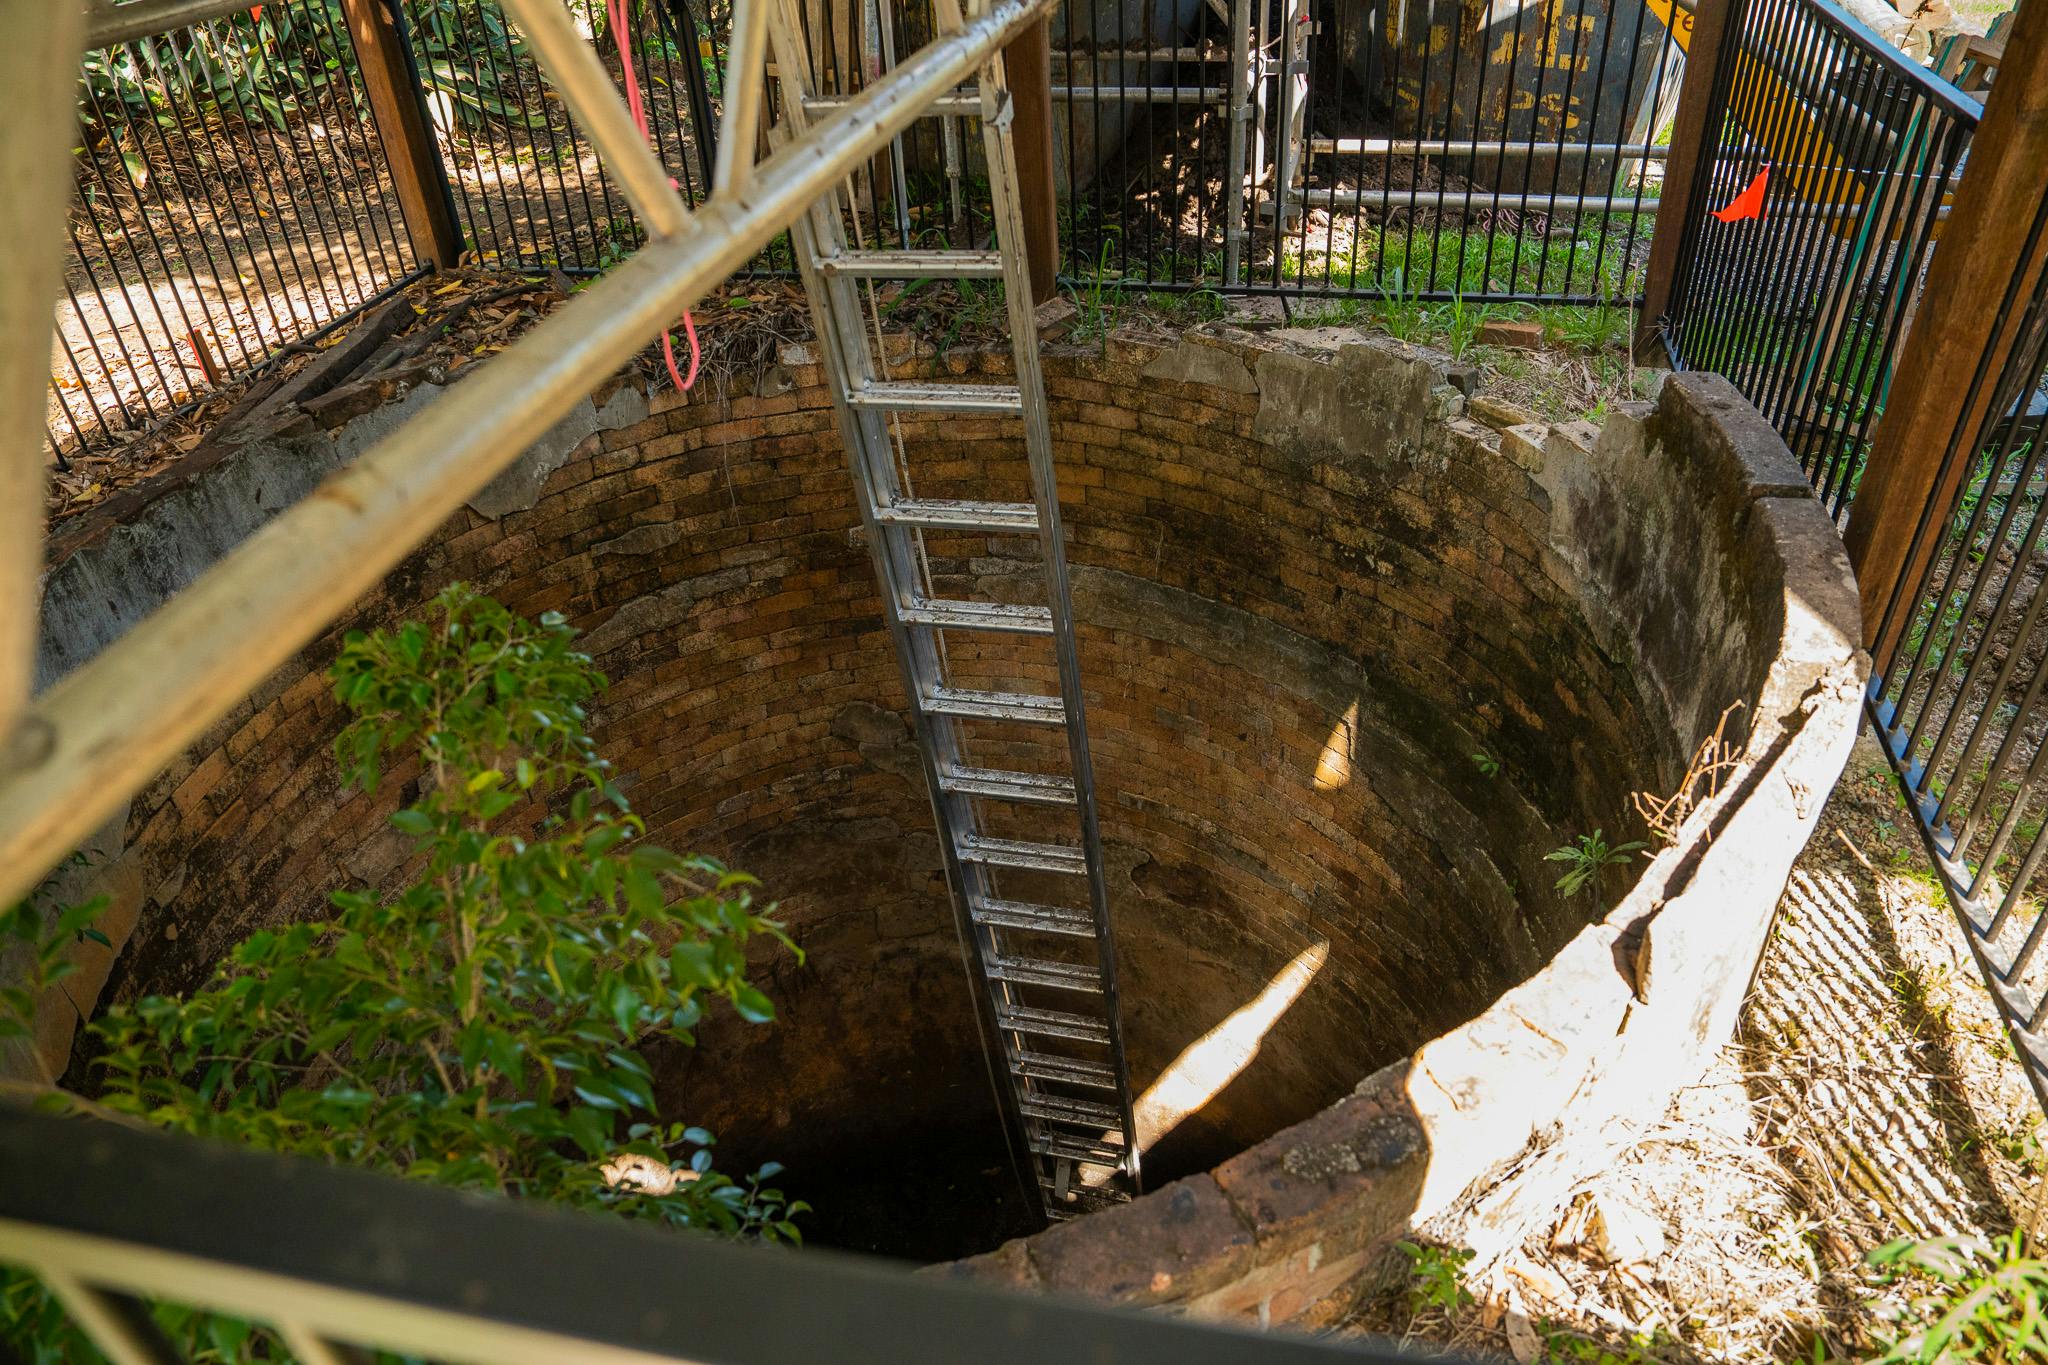 Willards Farm - cleaning out the brick cistern (well) in preparation for restoration works to commence.jpg